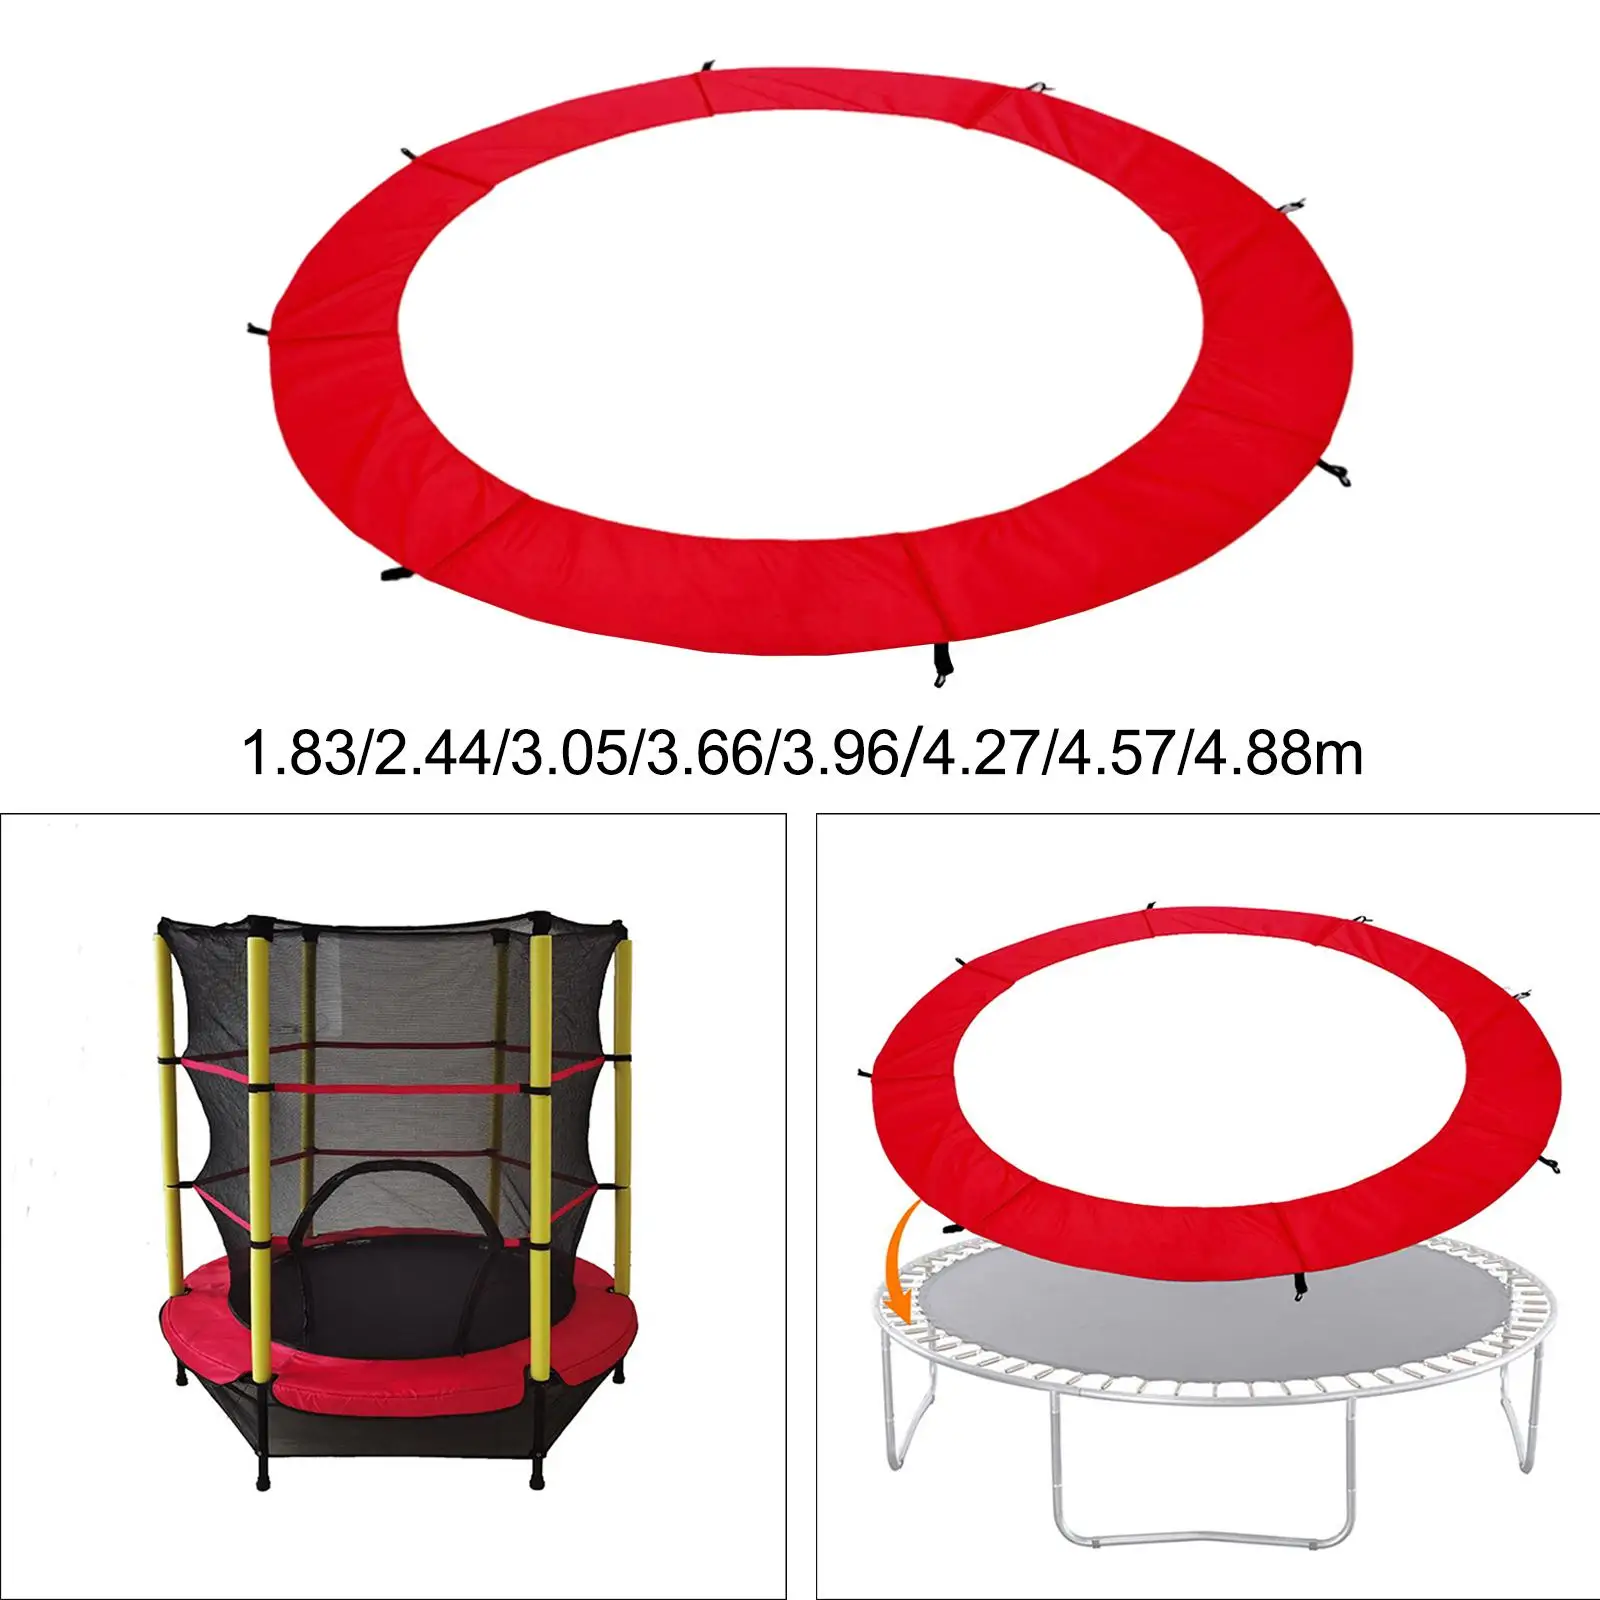 Trampoline Pad Cover Surround Guard Tear Resistant Water Resistant Round Frames Durable Safety Padding 1.2cm Thickness Guard